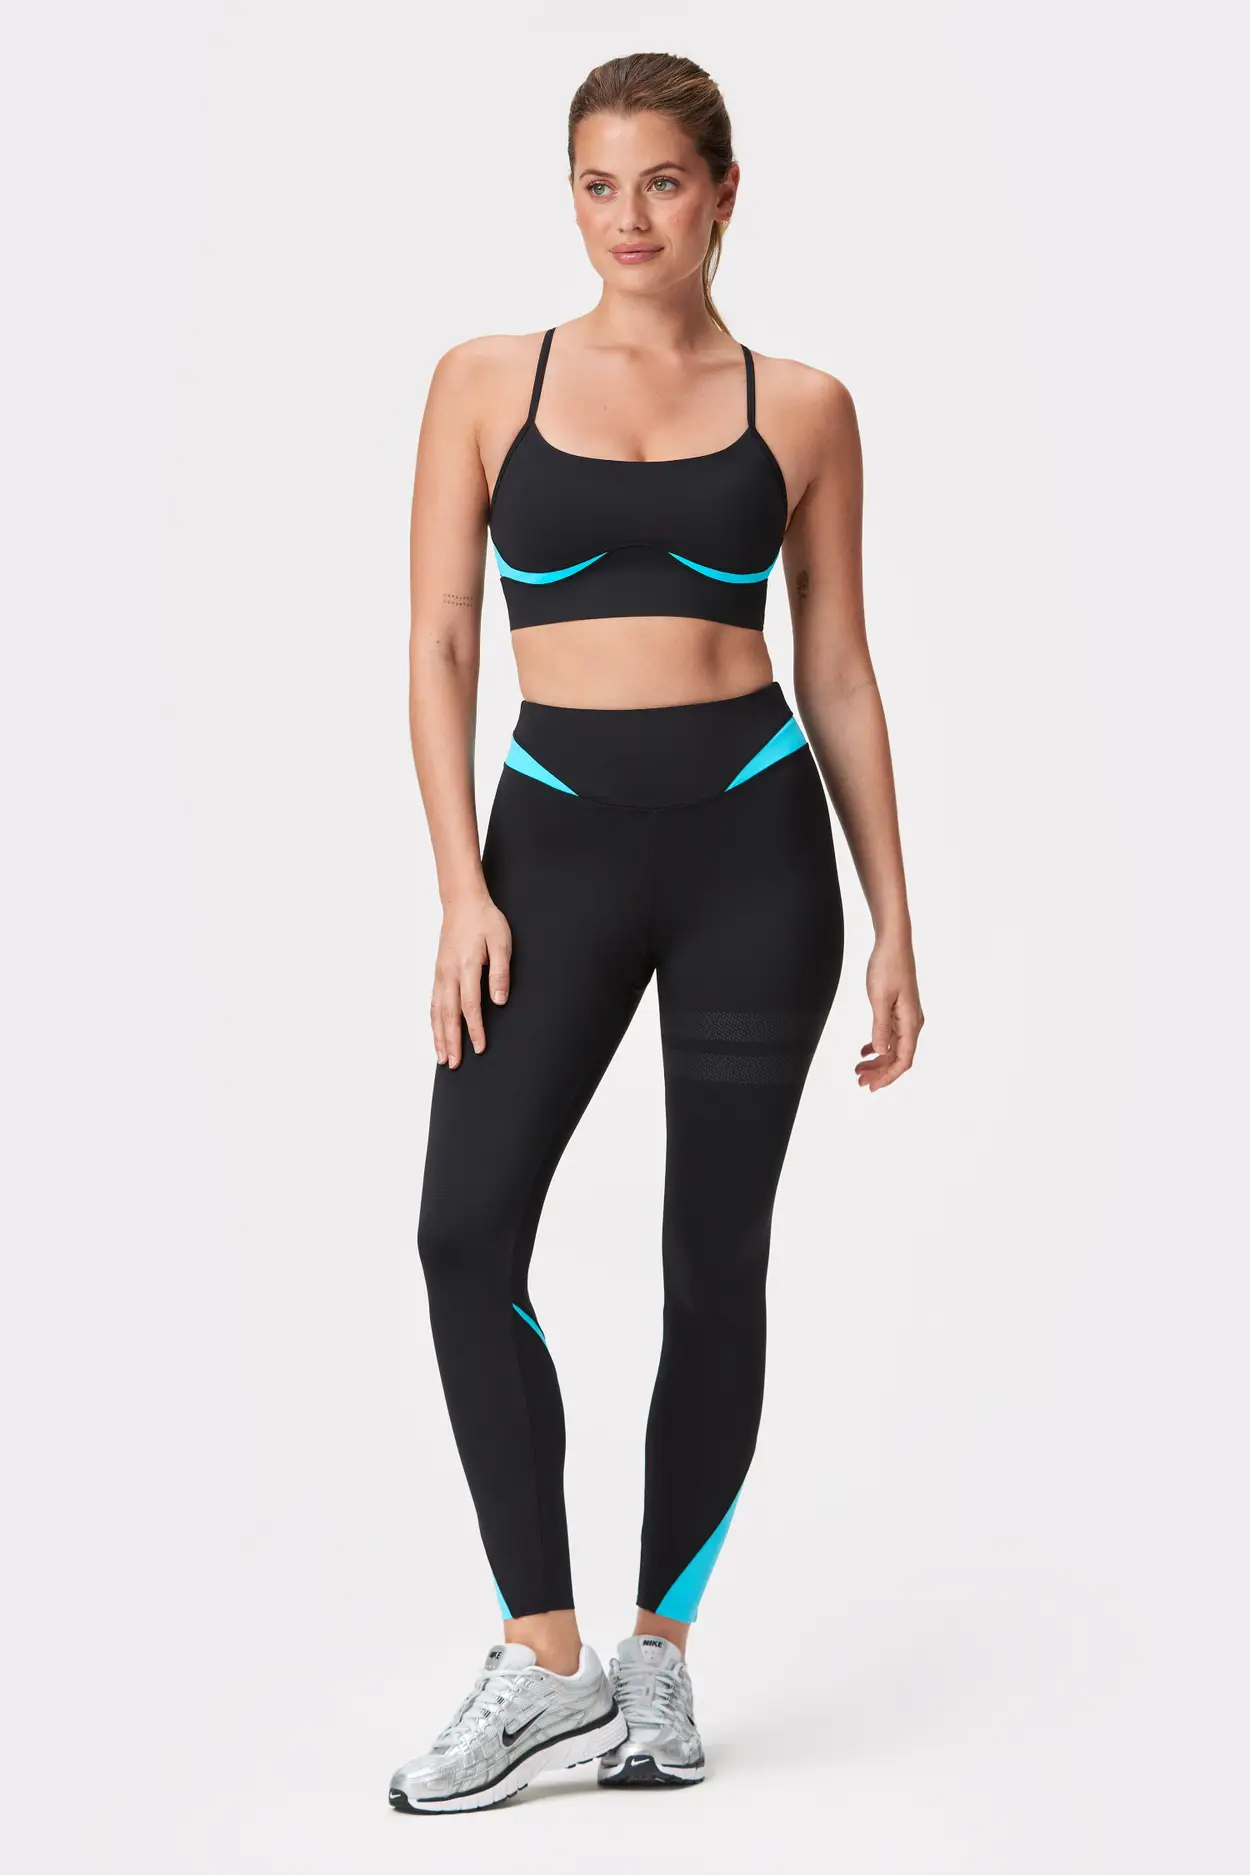 Strapt Apparel - ➖➖➖➖➖➖➖➖➖➖➖➖➖ Item: SA Lifestyle Leggings X Strapt Sports  Bra ➖➖➖➖➖➖➖➖➖➖➖➖➖➖➖➖ • Customized Tri-Blend Material Anti-Microbial  Mid-High Waist Mesh Side Inserts Lightweight, Soft, Breathable Non See  Through